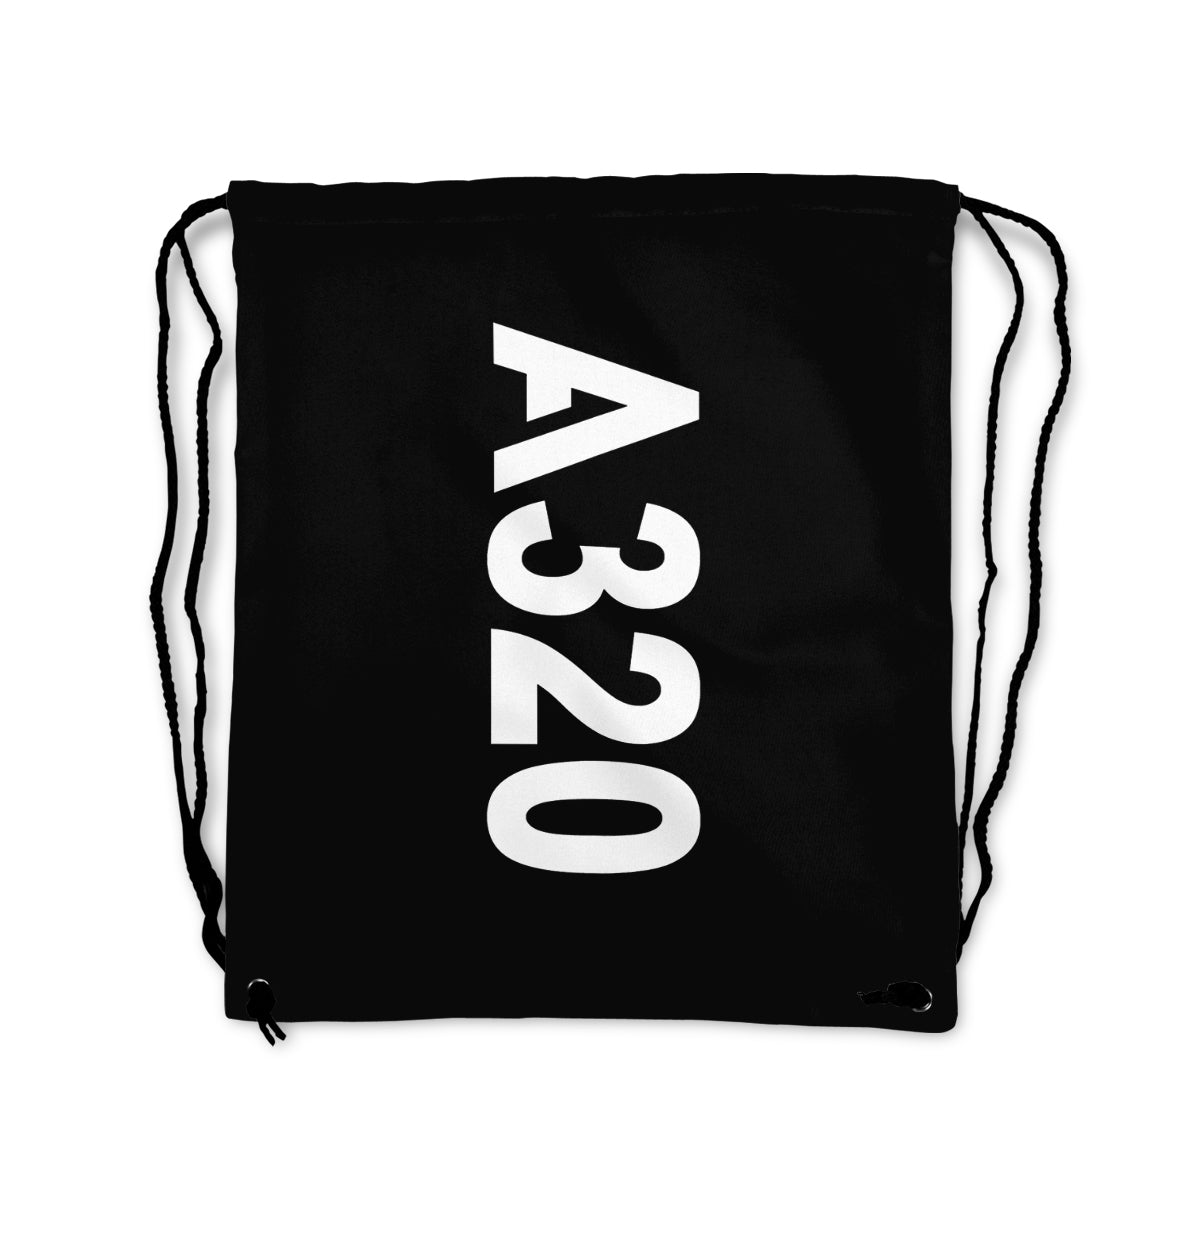 A320 Text Designed Drawstring Bags